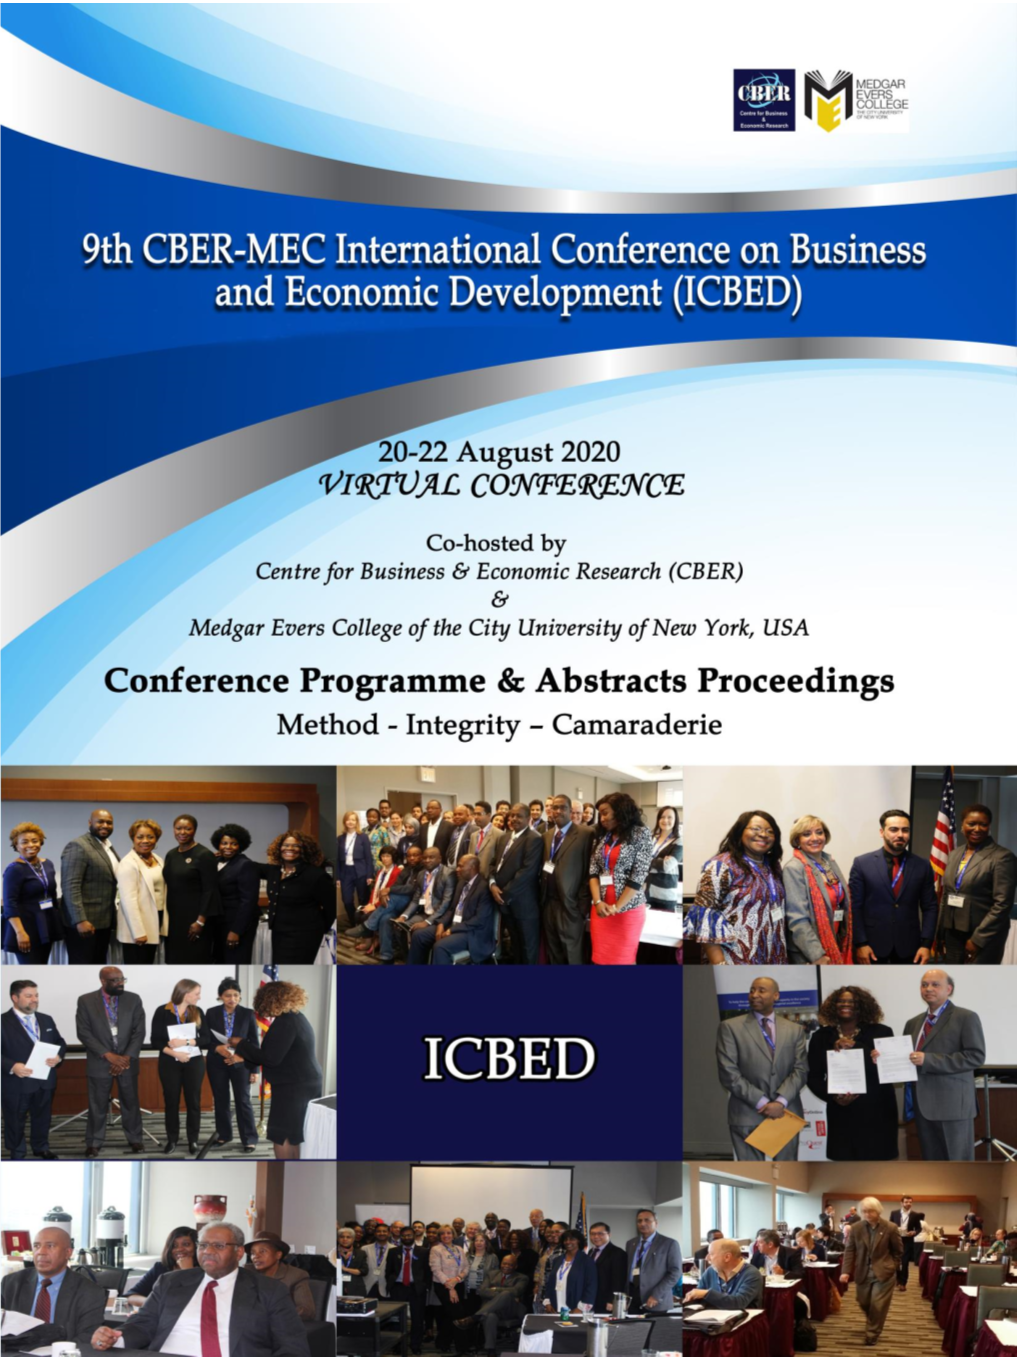 CBER-MEC 9Th ICBED-2020, Schedule for the Virtual Conference August 2020